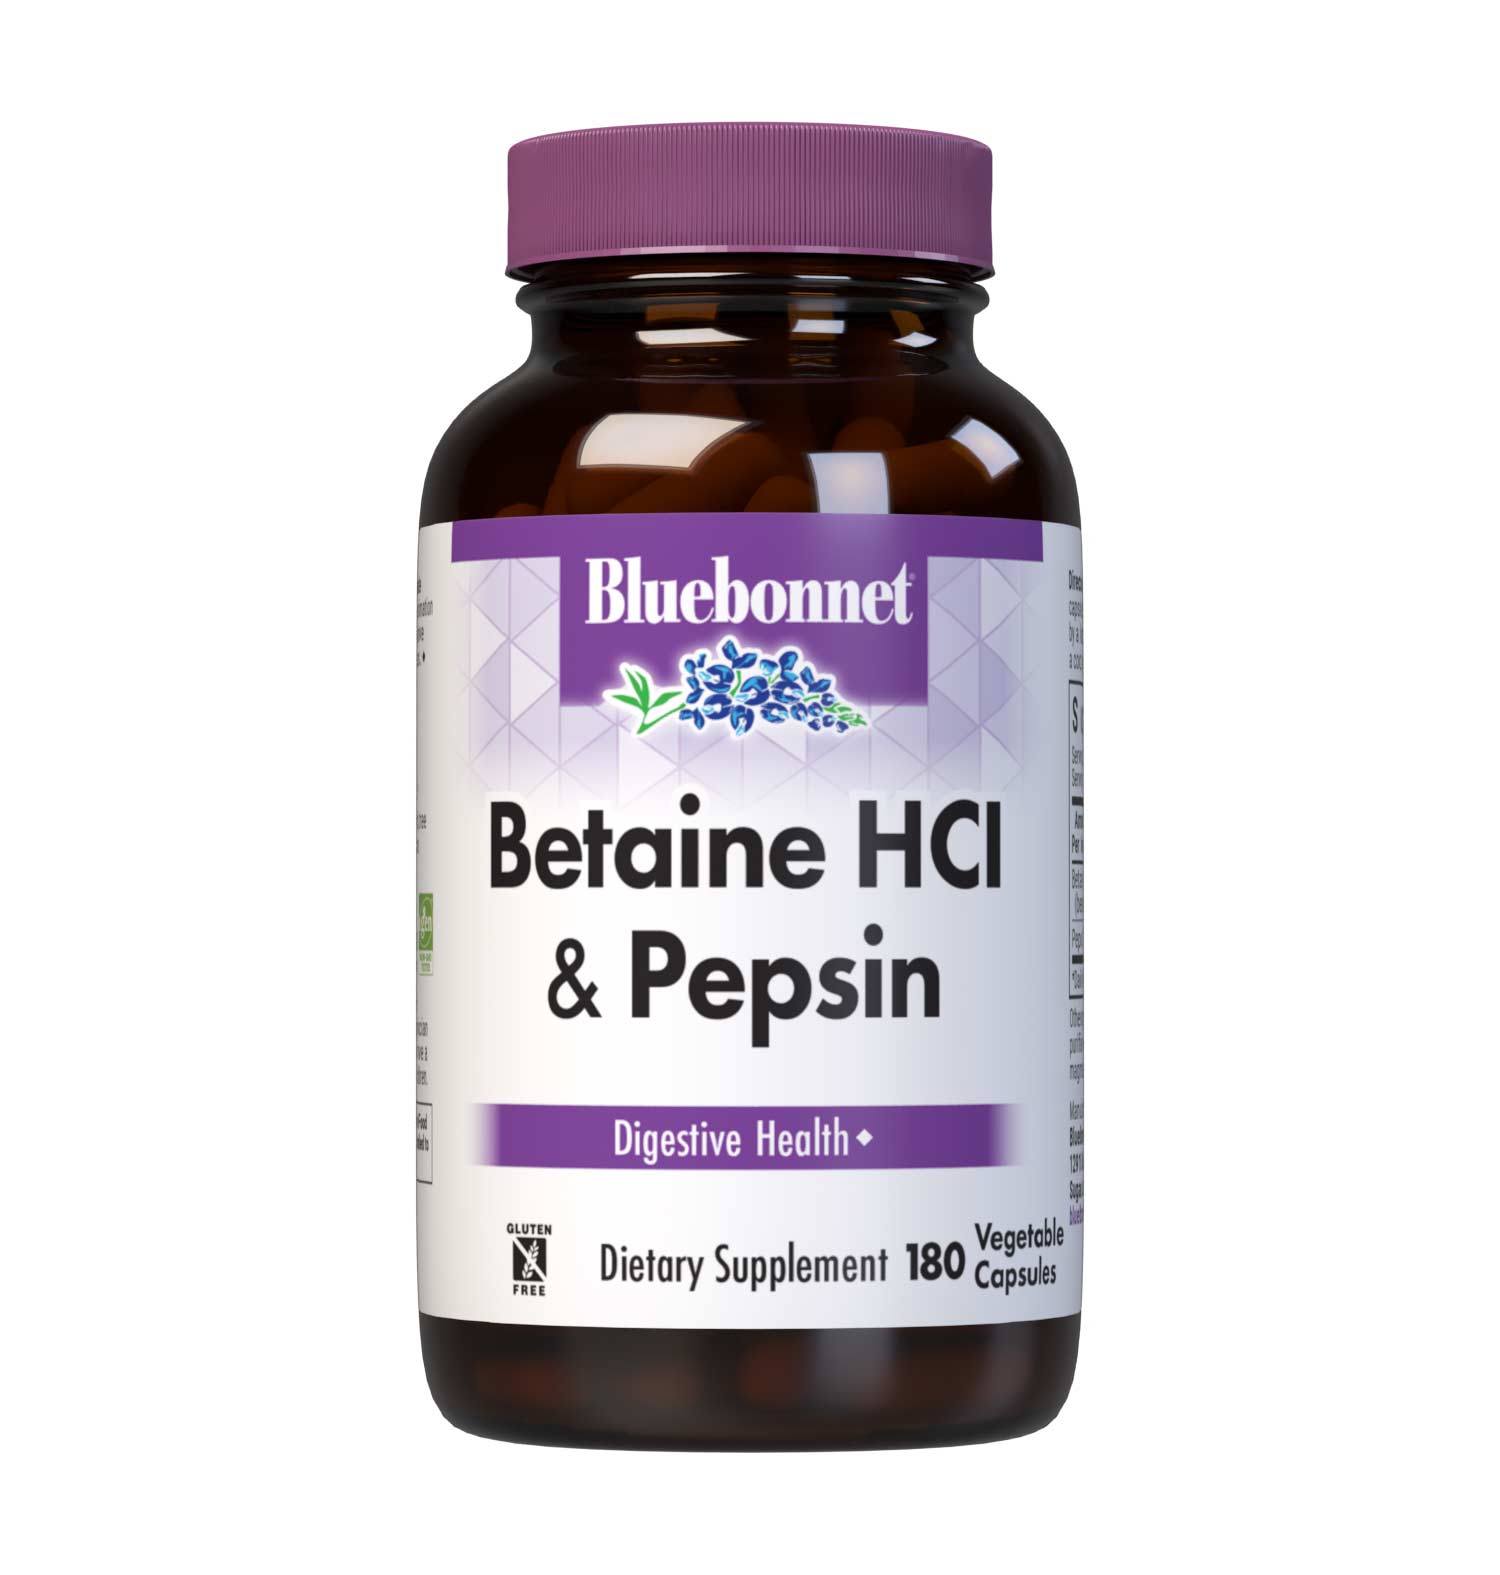 Bluebonnet’s Betaine HCl Plus Pepsin 180 Vegetable Capsules are formulated with a special combination of betaine hydrochloride and pepsin, a digestive enzyme.  #size_180 count